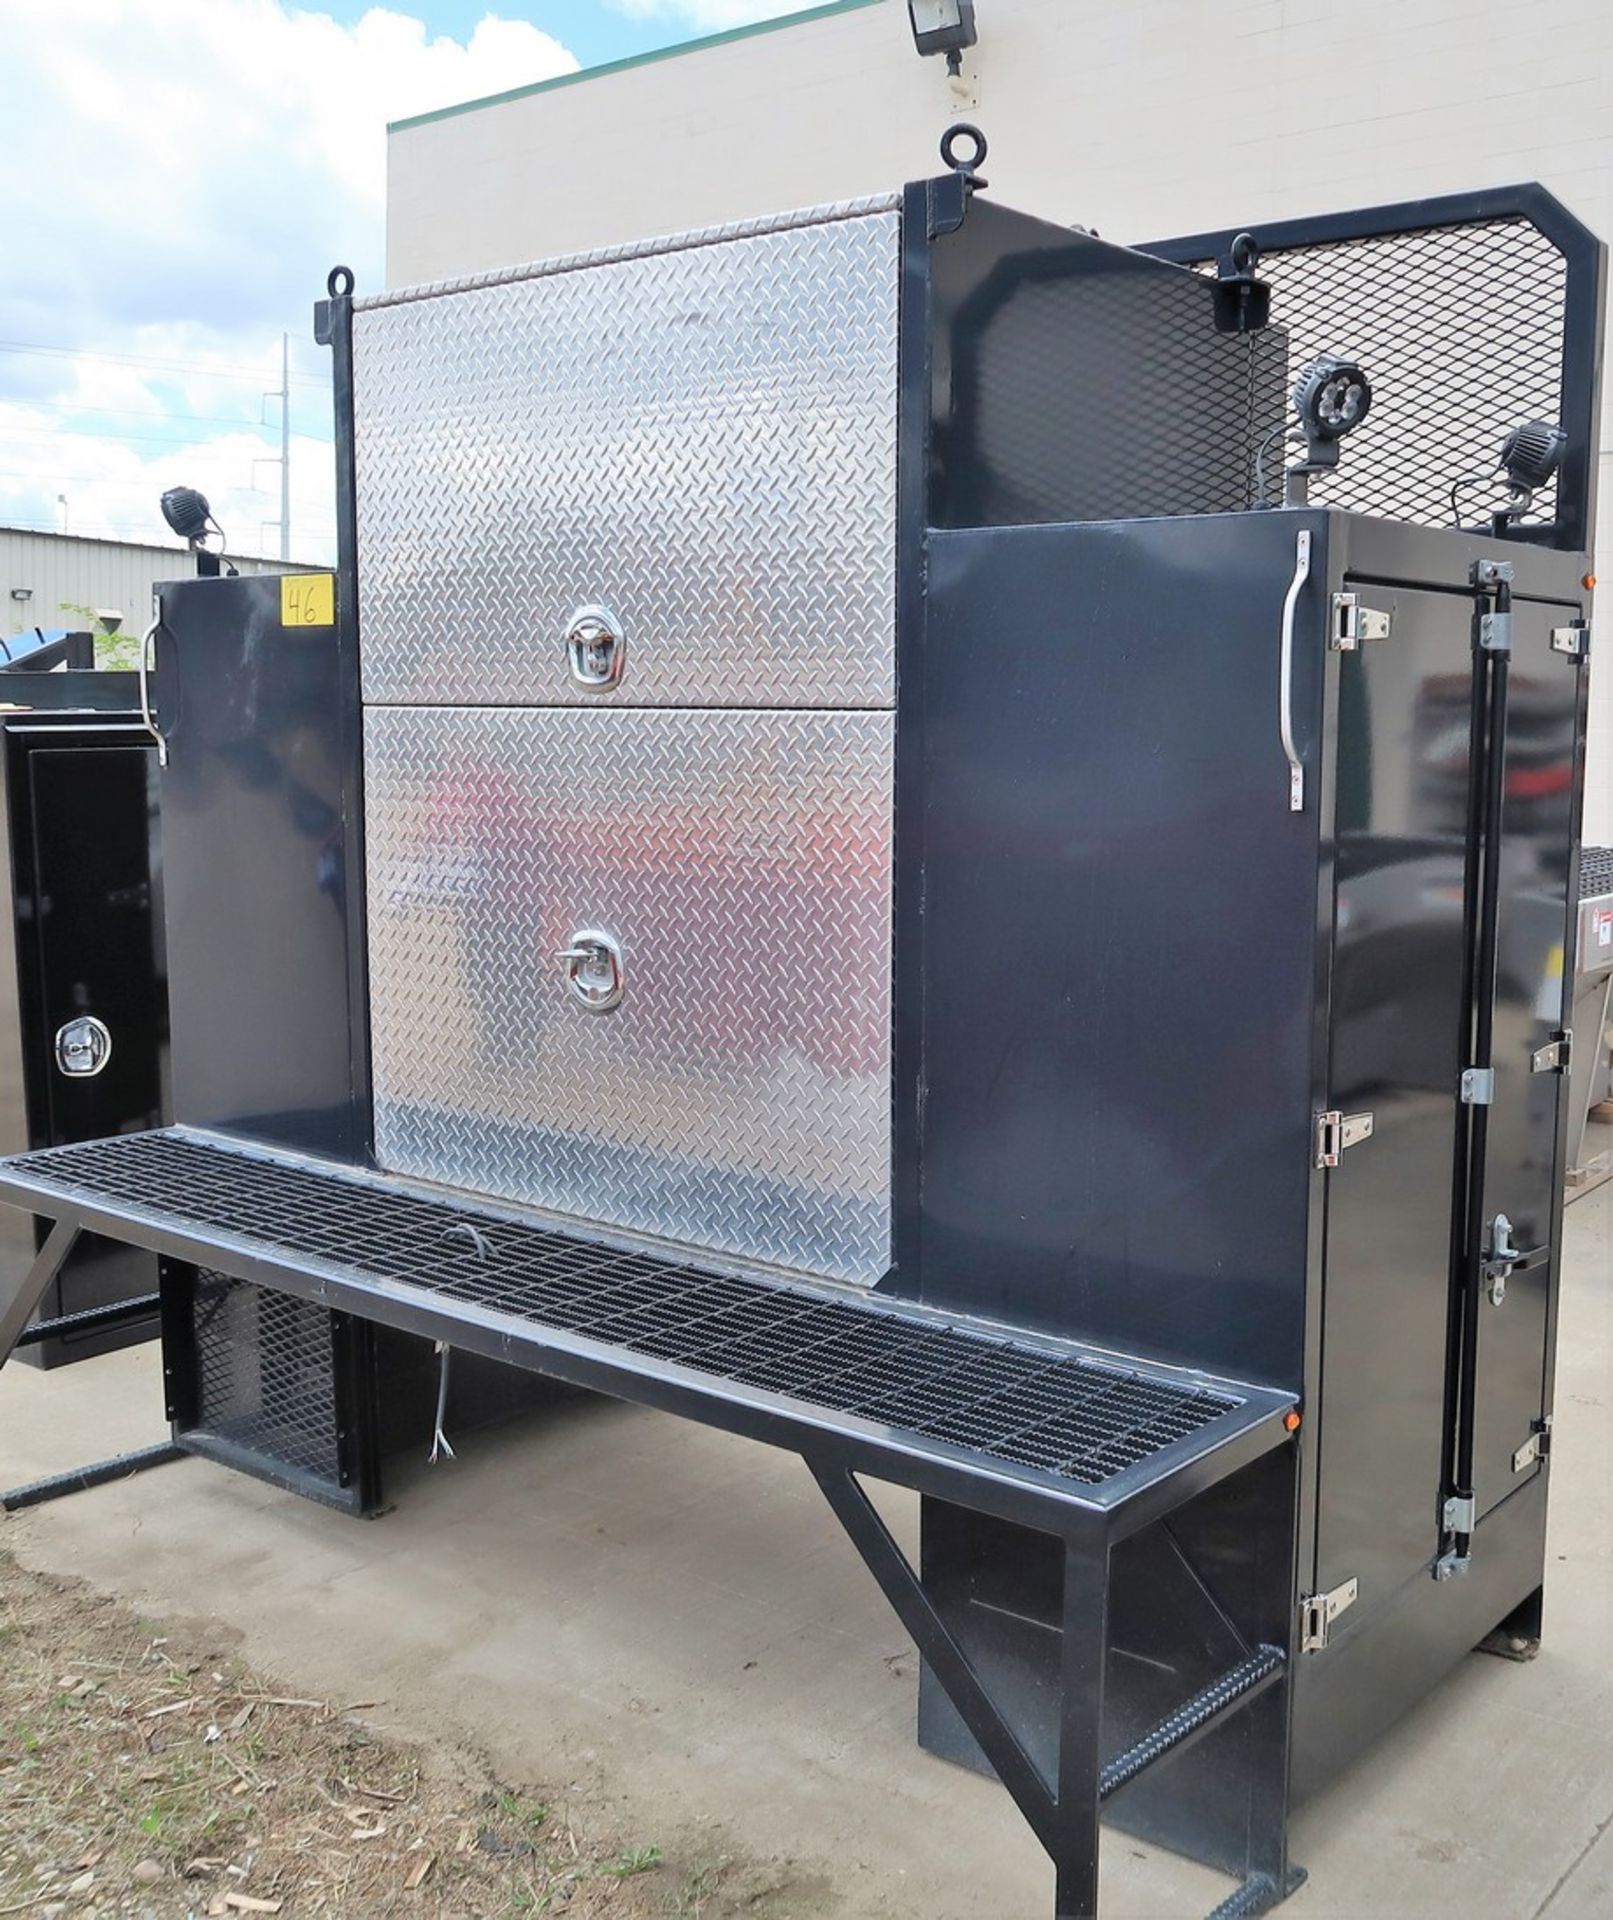 DEL BEHIND CAB CABINETS 36" X 66" W/ENCLOSED CENTER CABINETS, 18" WALKING DECK - Image 2 of 3